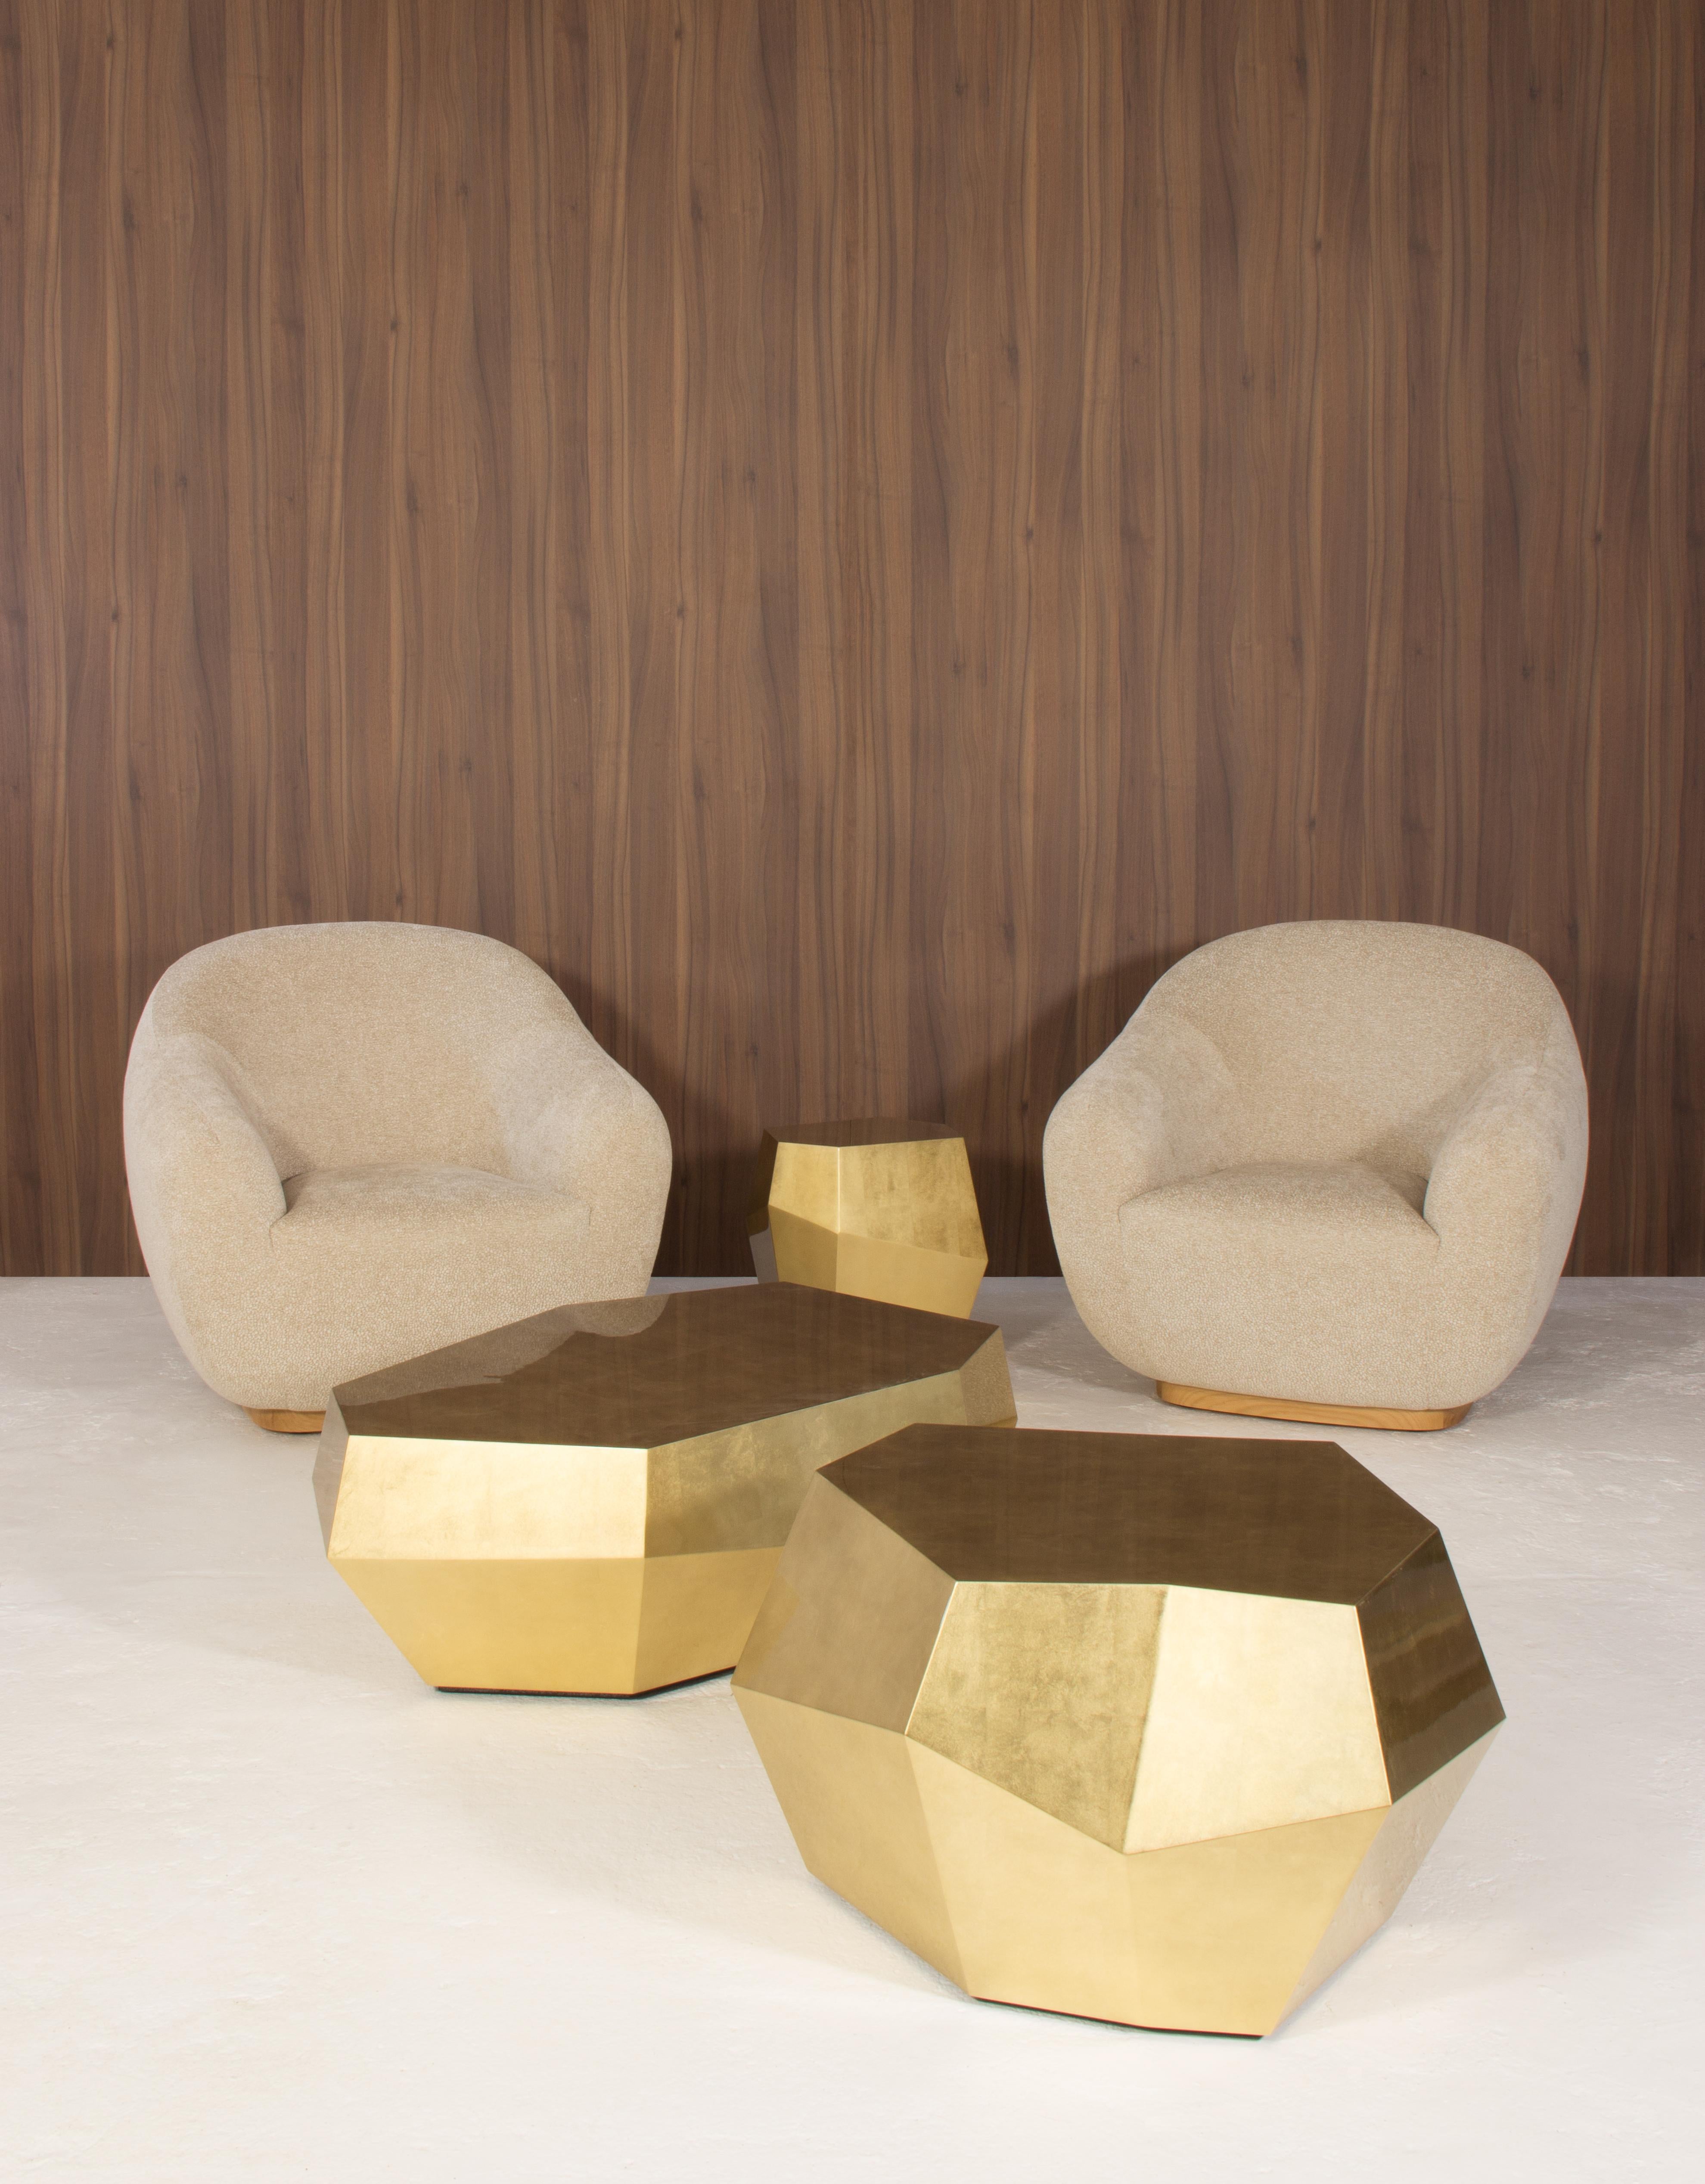 Portuguese Three Rocks Low Coffee Table, Gold Leaf, InsidherLand by Joana Santos Barbosa For Sale